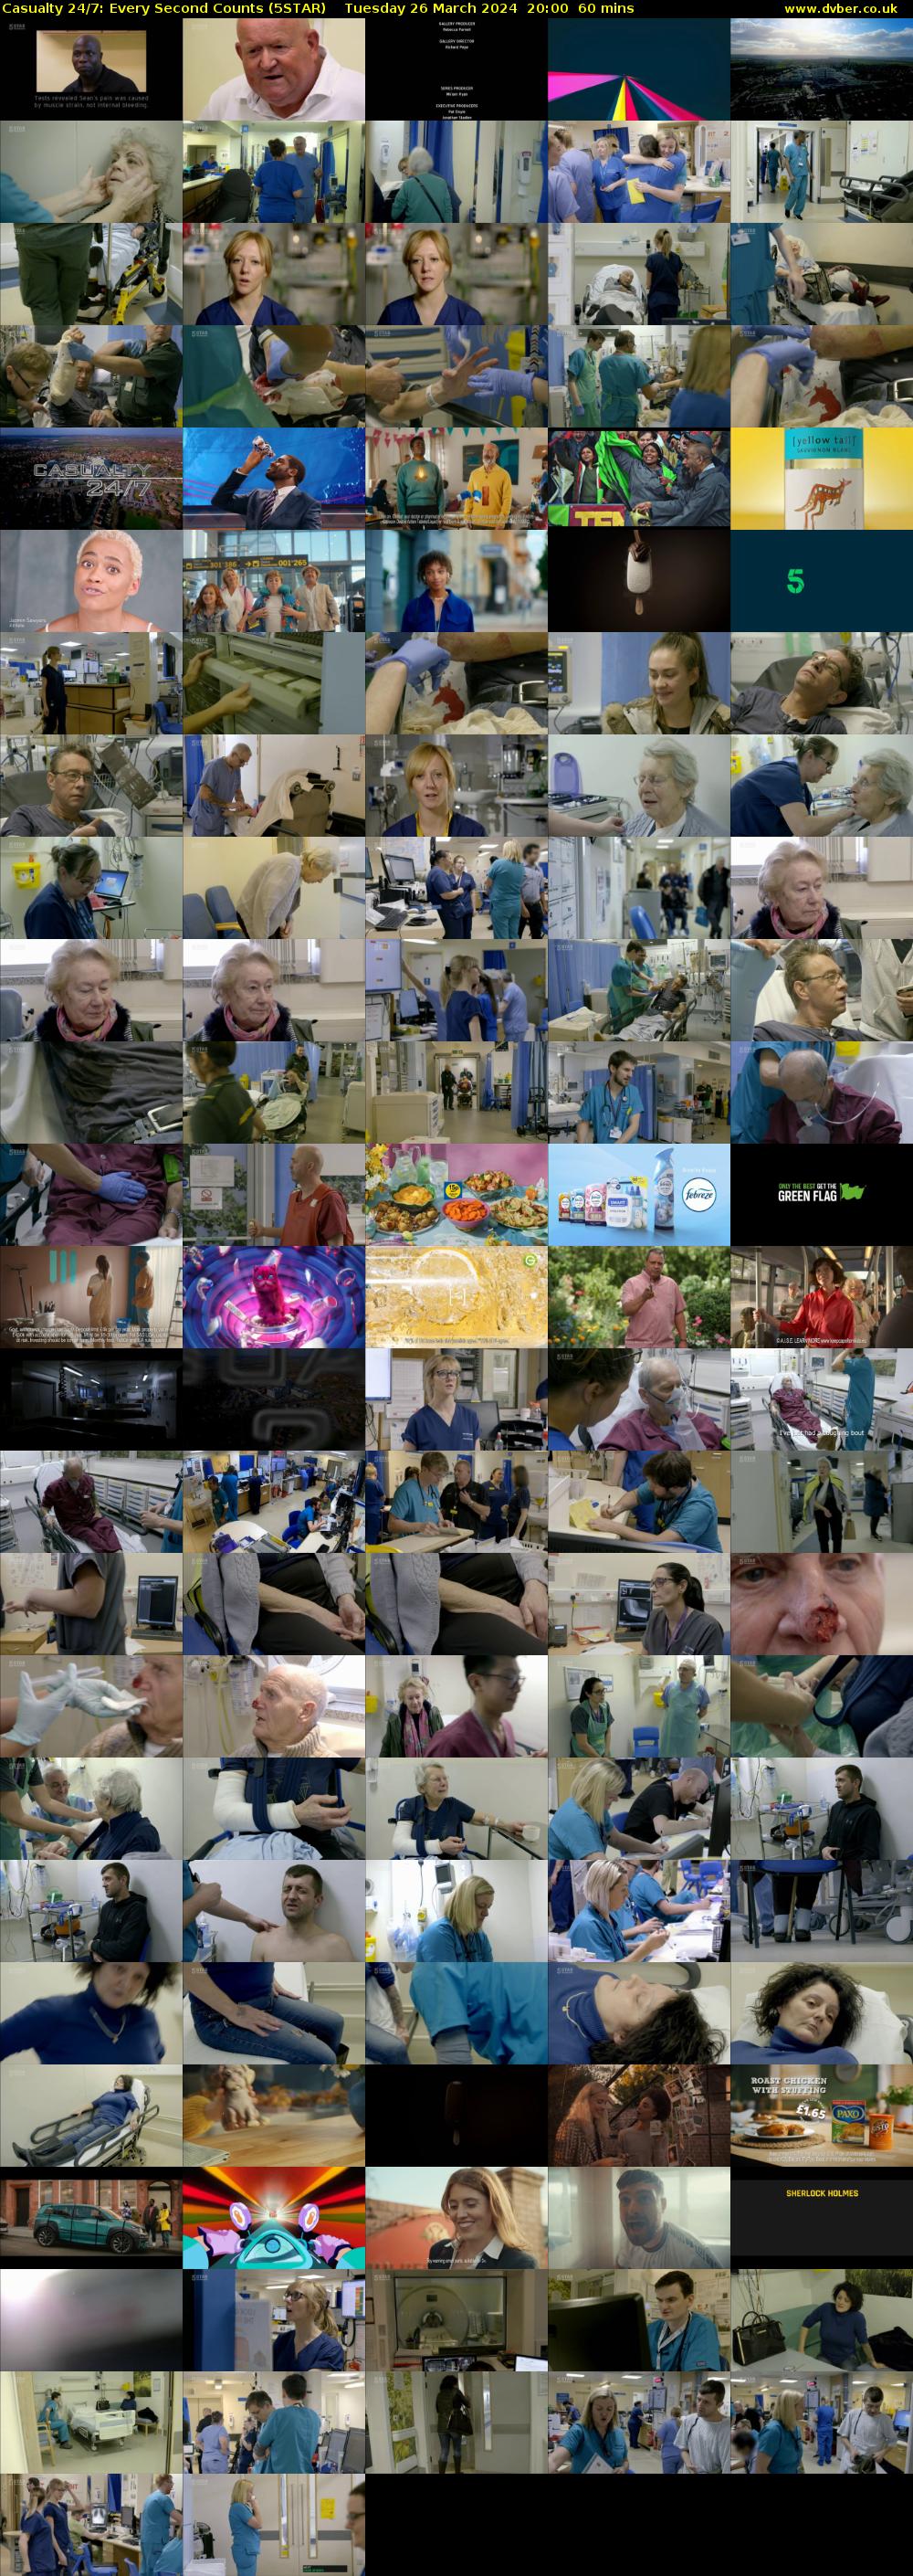 Casualty 24/7: Every Second Counts (5STAR) Tuesday 26 March 2024 20:00 - 21:00